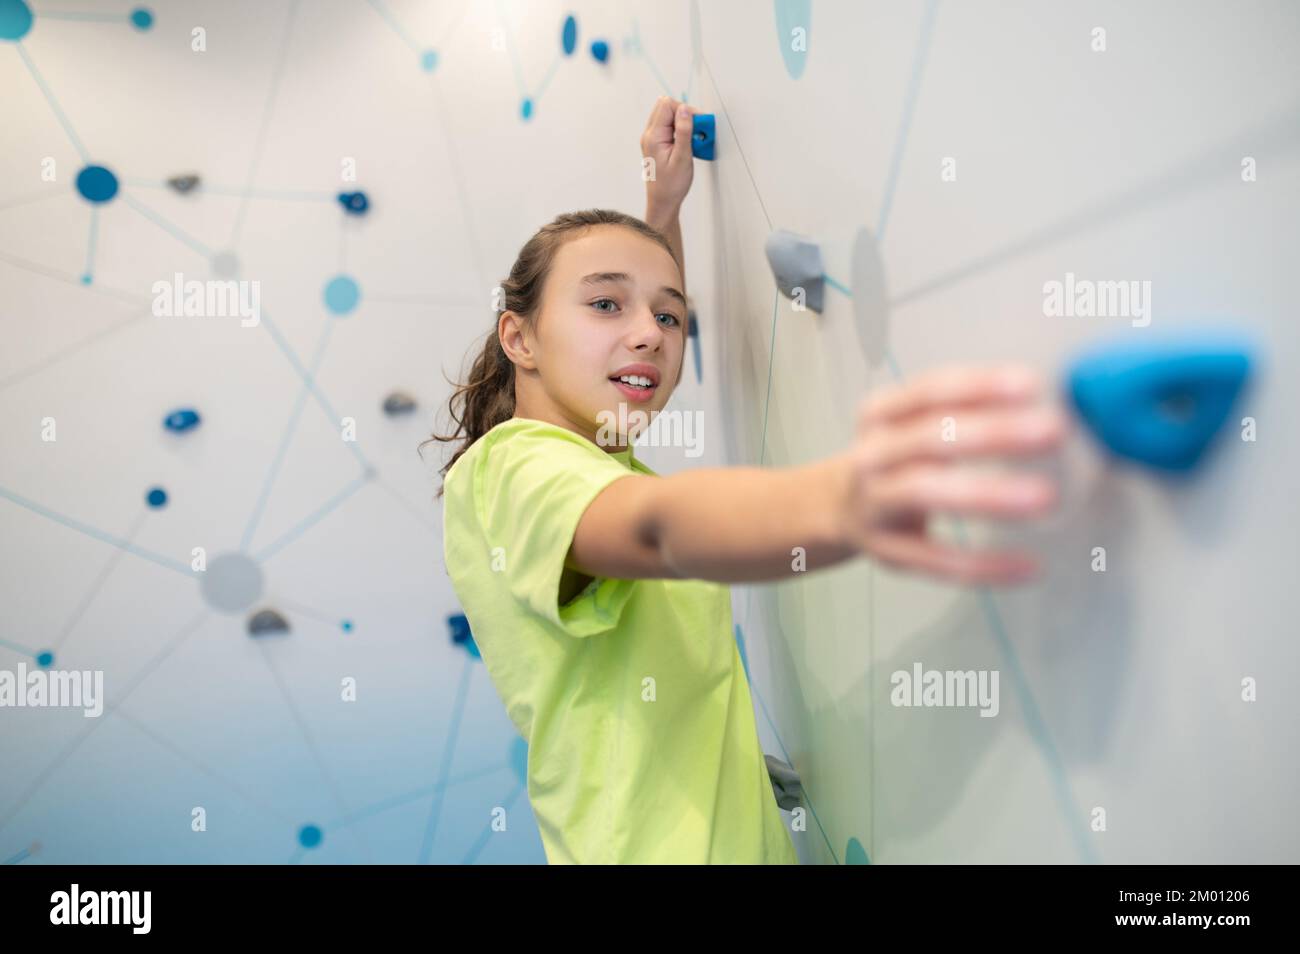 Fortitude. Purposeful striving girl on climbing practice wall with effort stretching her hand towards camera towards ledge in lighted room. Stock Photo